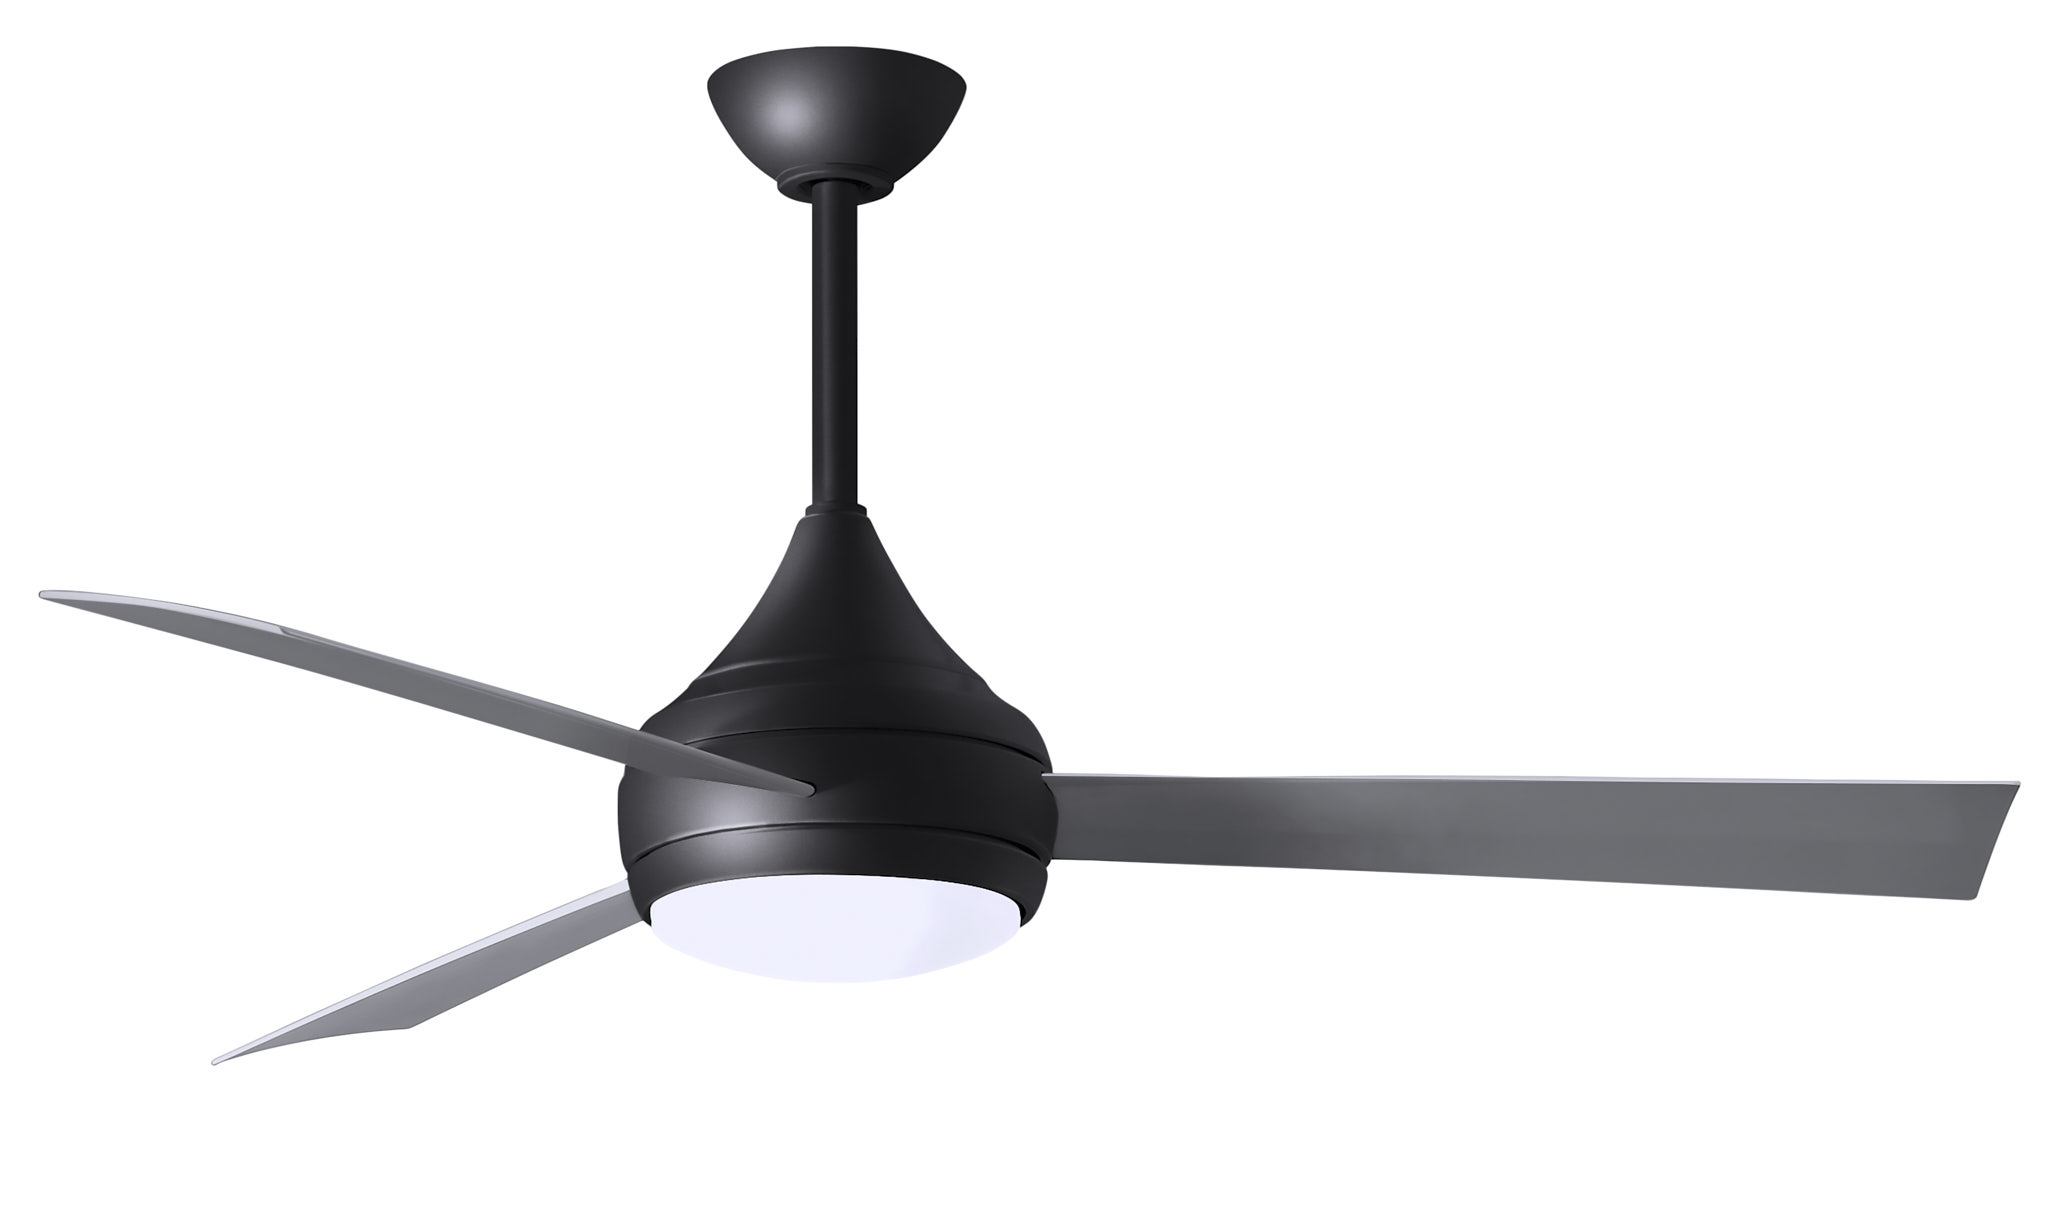 Donaire ceiling fan in Matte Black with Brushed Stainless blades without light cap manufactured by Matthews Fan Company.